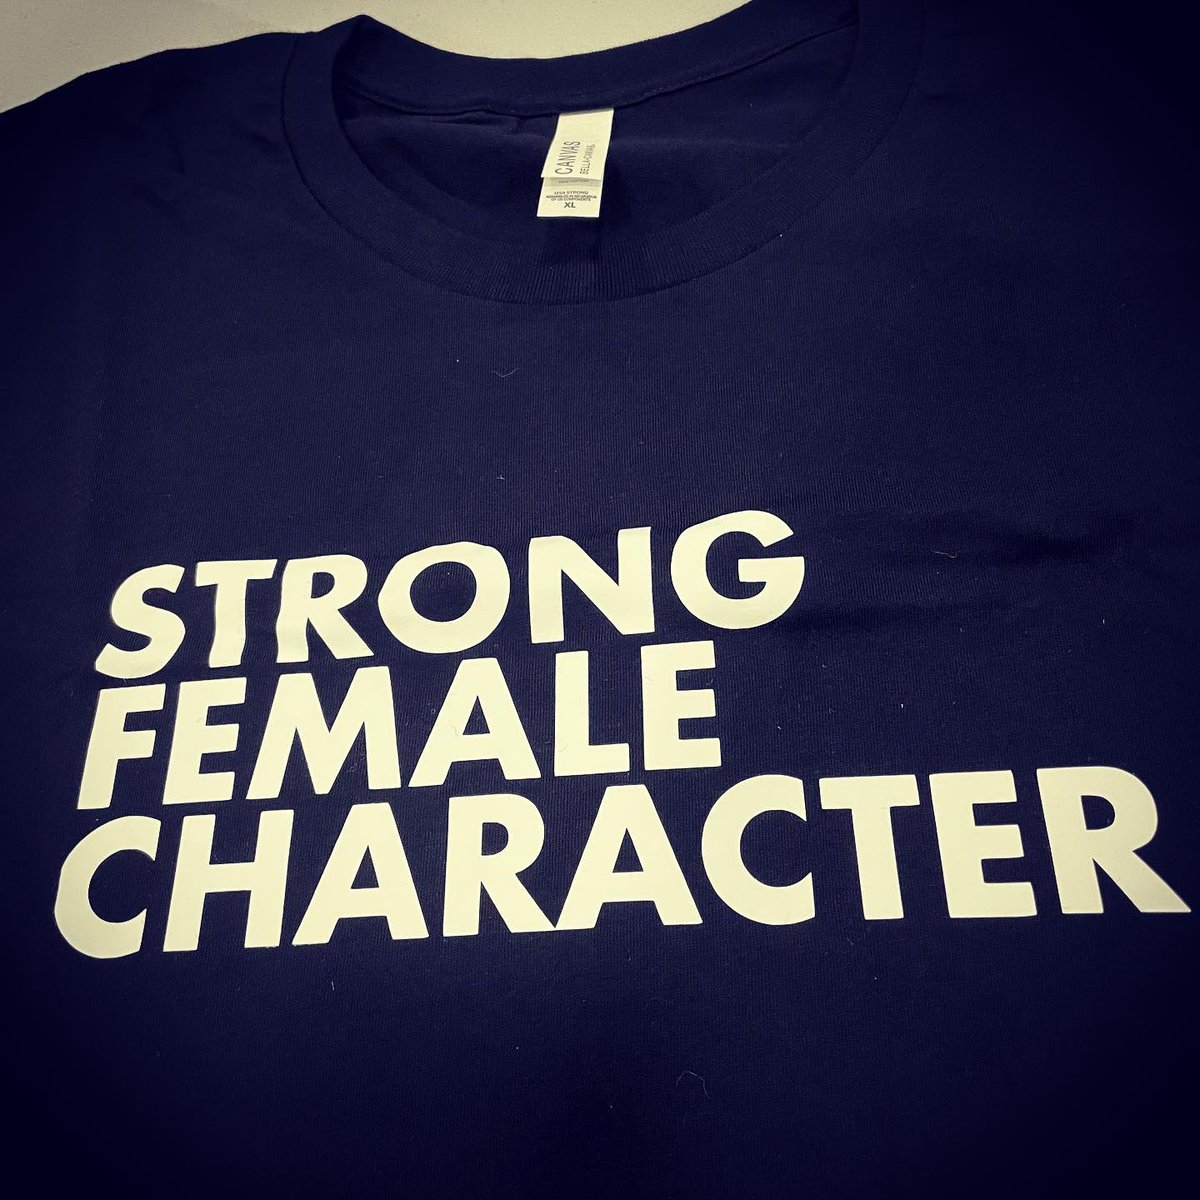 New shirts added to the shop to celebrate #PrideMonth, #strongfemalecharacters, and #queerrepresentation 🏳️‍🌈
I hope these bring you all as much joy as they have to us! 
etsy.com/shop/SketchAnd…